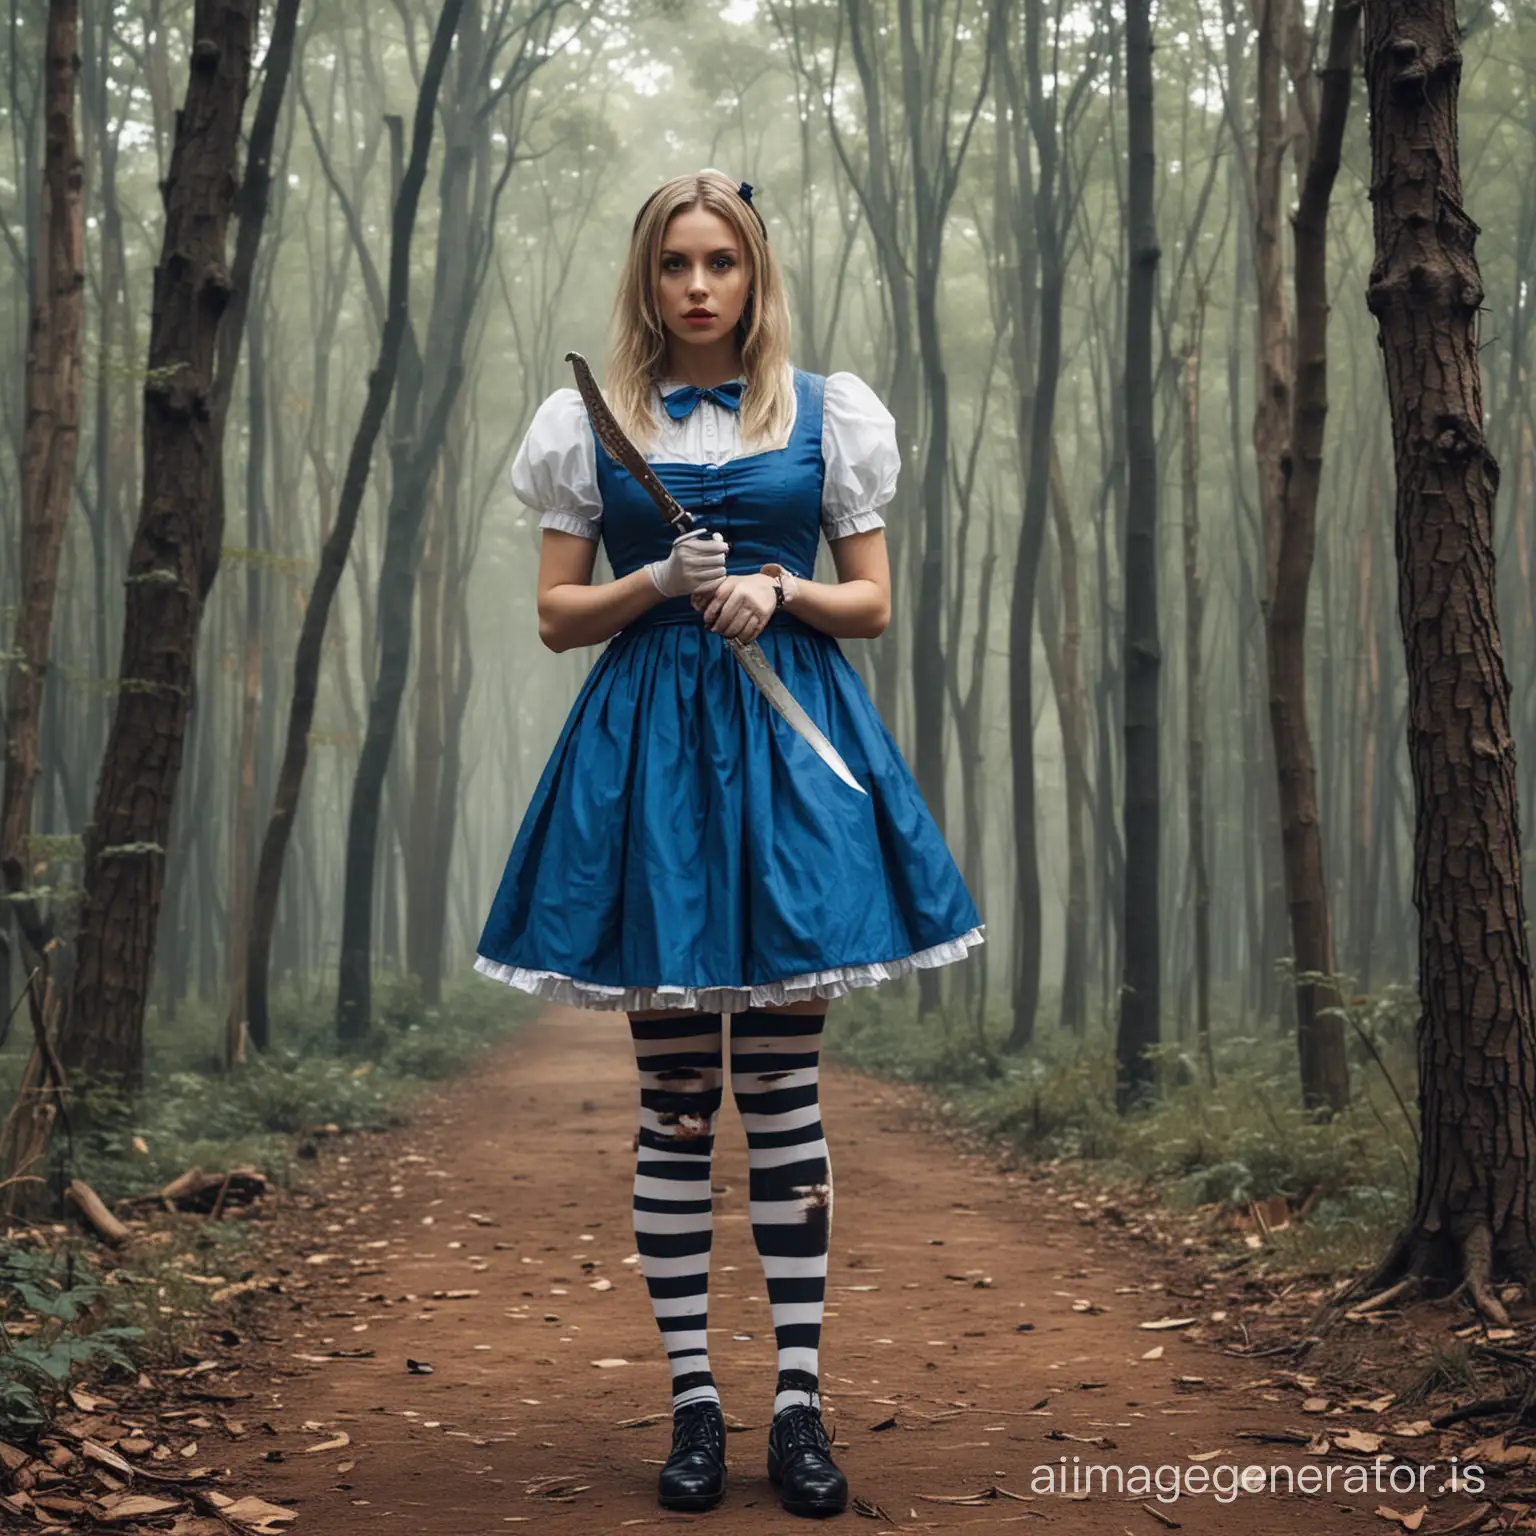 tanned alice in wonderland with black and white striped stockings and blue dress holding a knife madness returns in bright forest